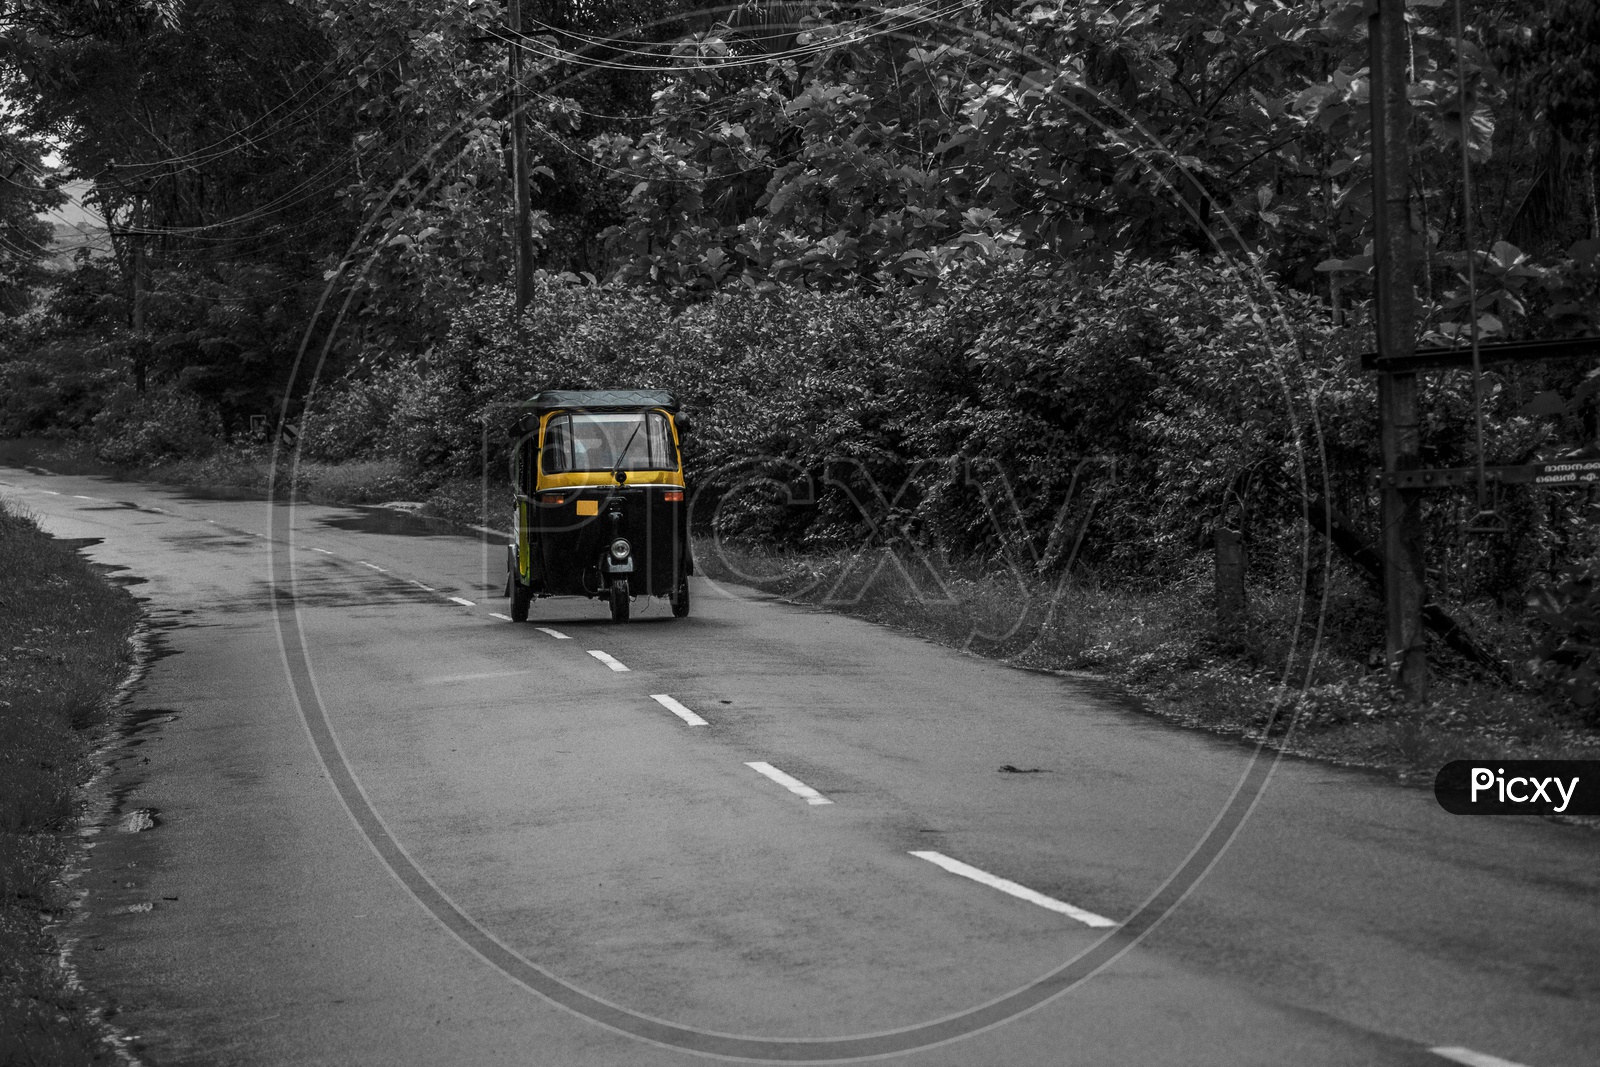 The beautiful Green Paths of the road trips to Wayanad, Kerala